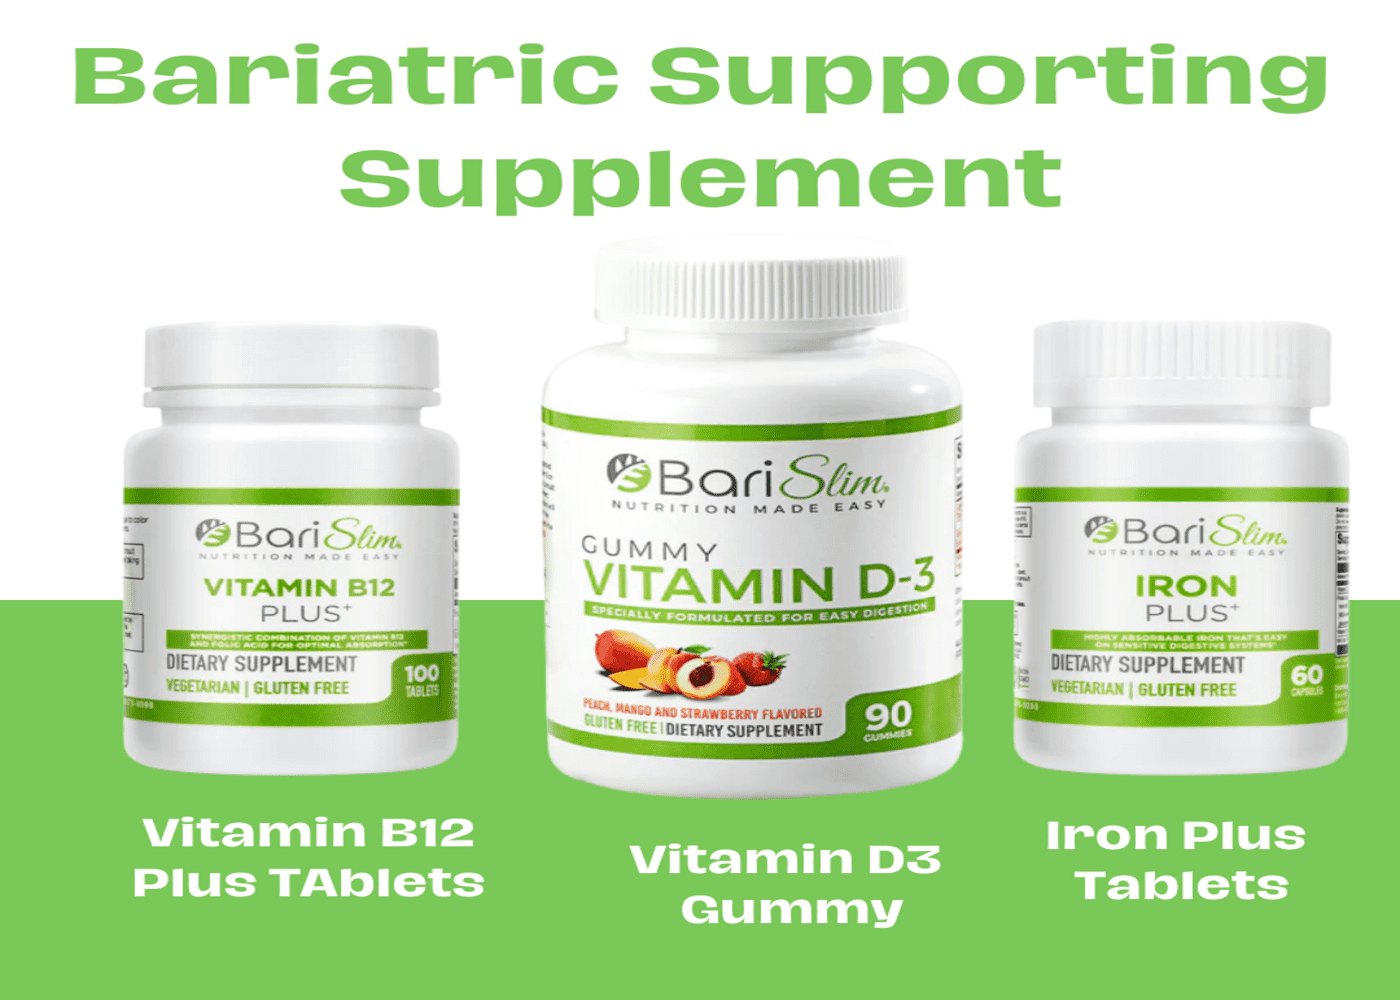 Choose the Best Bariatric Vitamins | Bariatric Supporting Supplement | Barislim